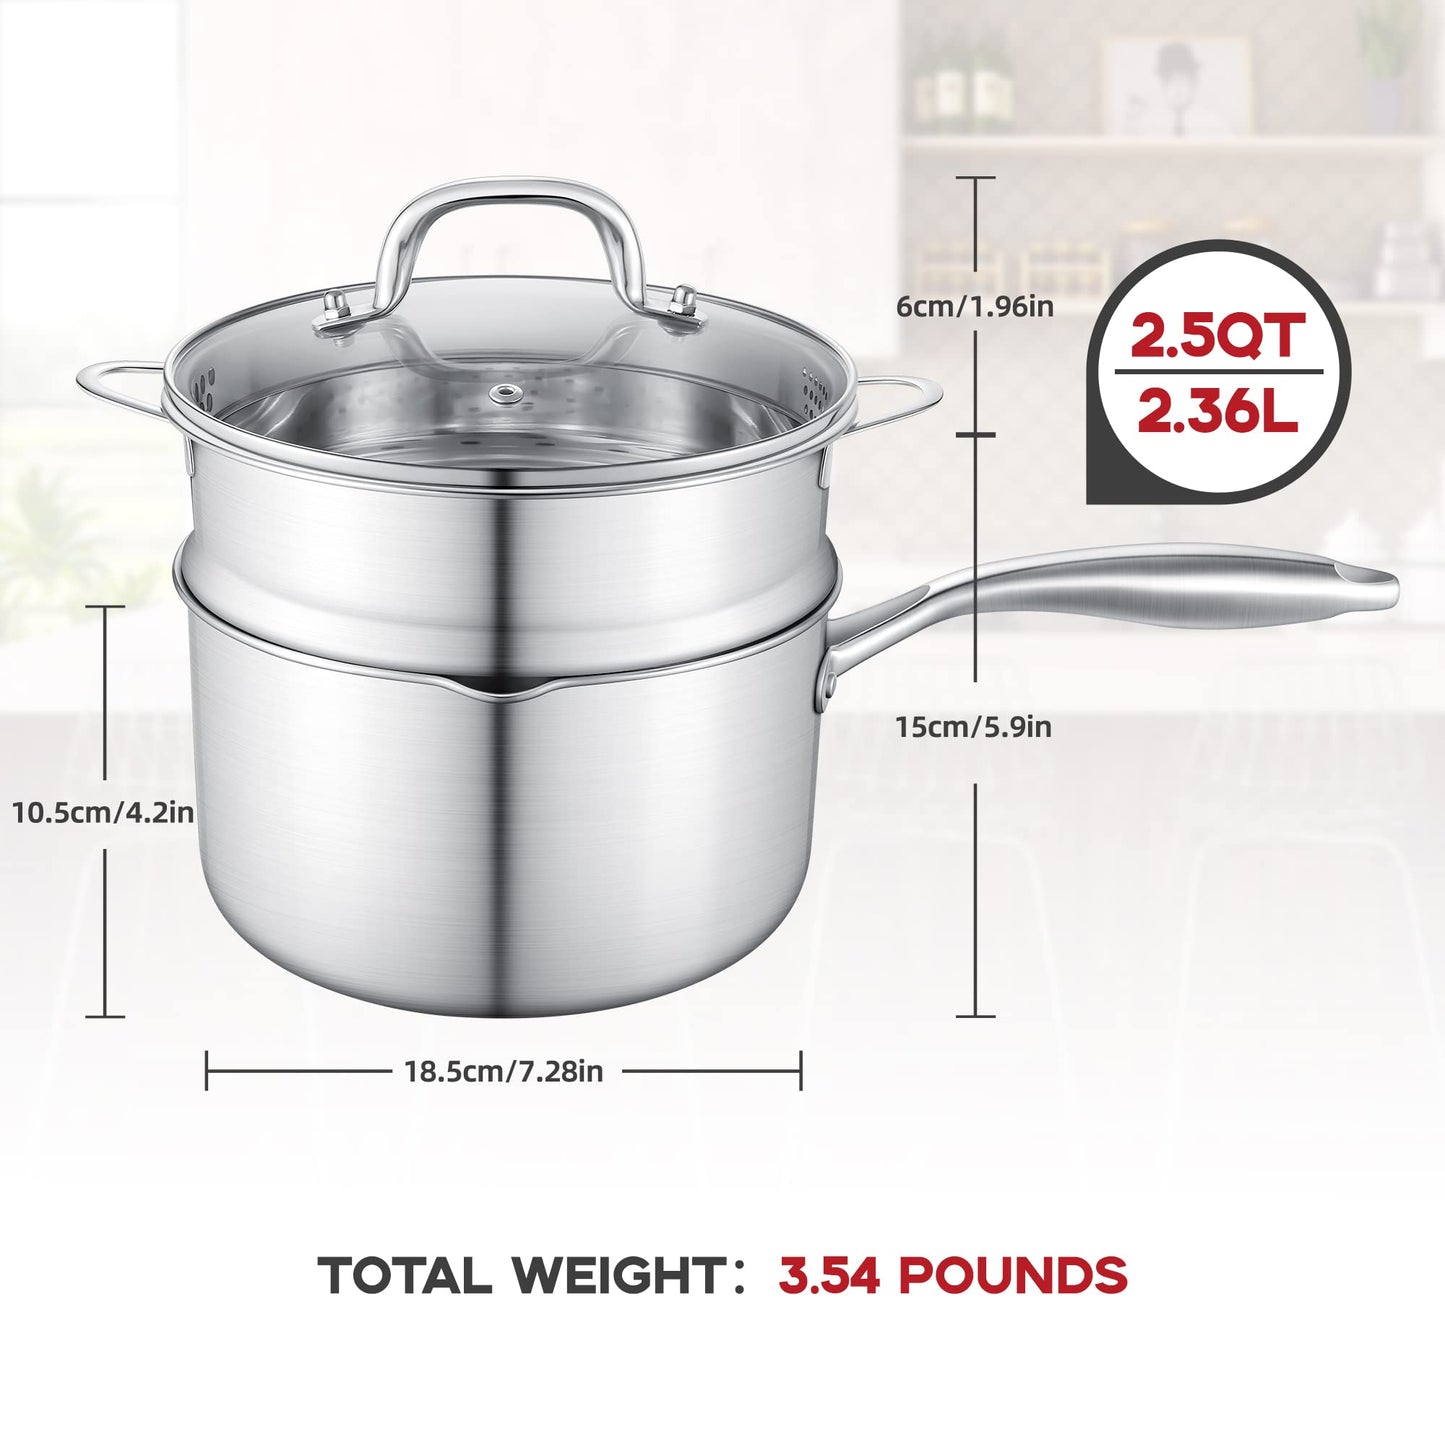 Buttermelt 2.5 Quart Stainless Steel Saucepan with Steamer Basket, Tri-ply Full Body, Multipurpose Sauce Pot with Two-Size Drainage Holes Lid, Perfect For Boiling Gravies, Pasta, Noodles